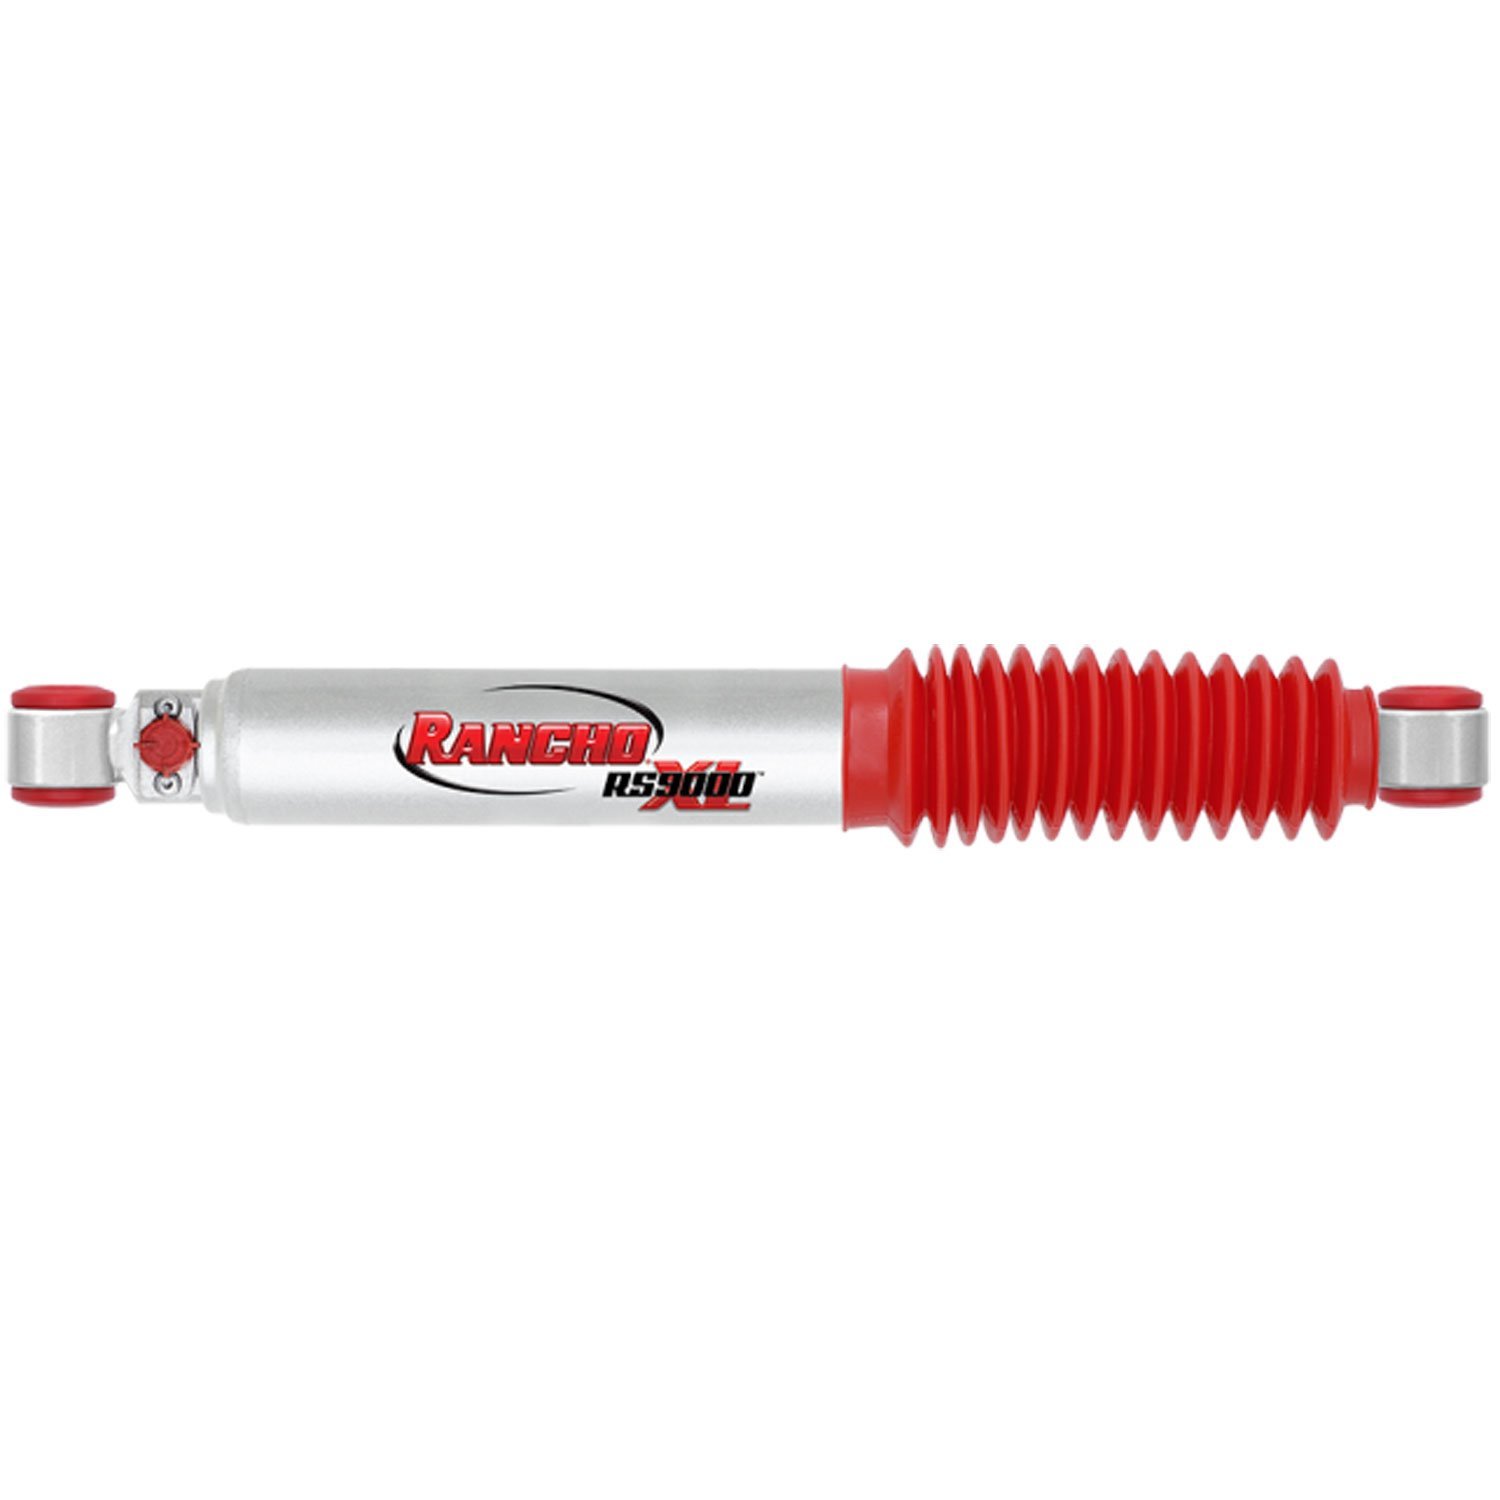 RS9000XL Rear Shock Absorber Fits Toyota 4Runner, Land Cruiser, Pickup and Tacoma